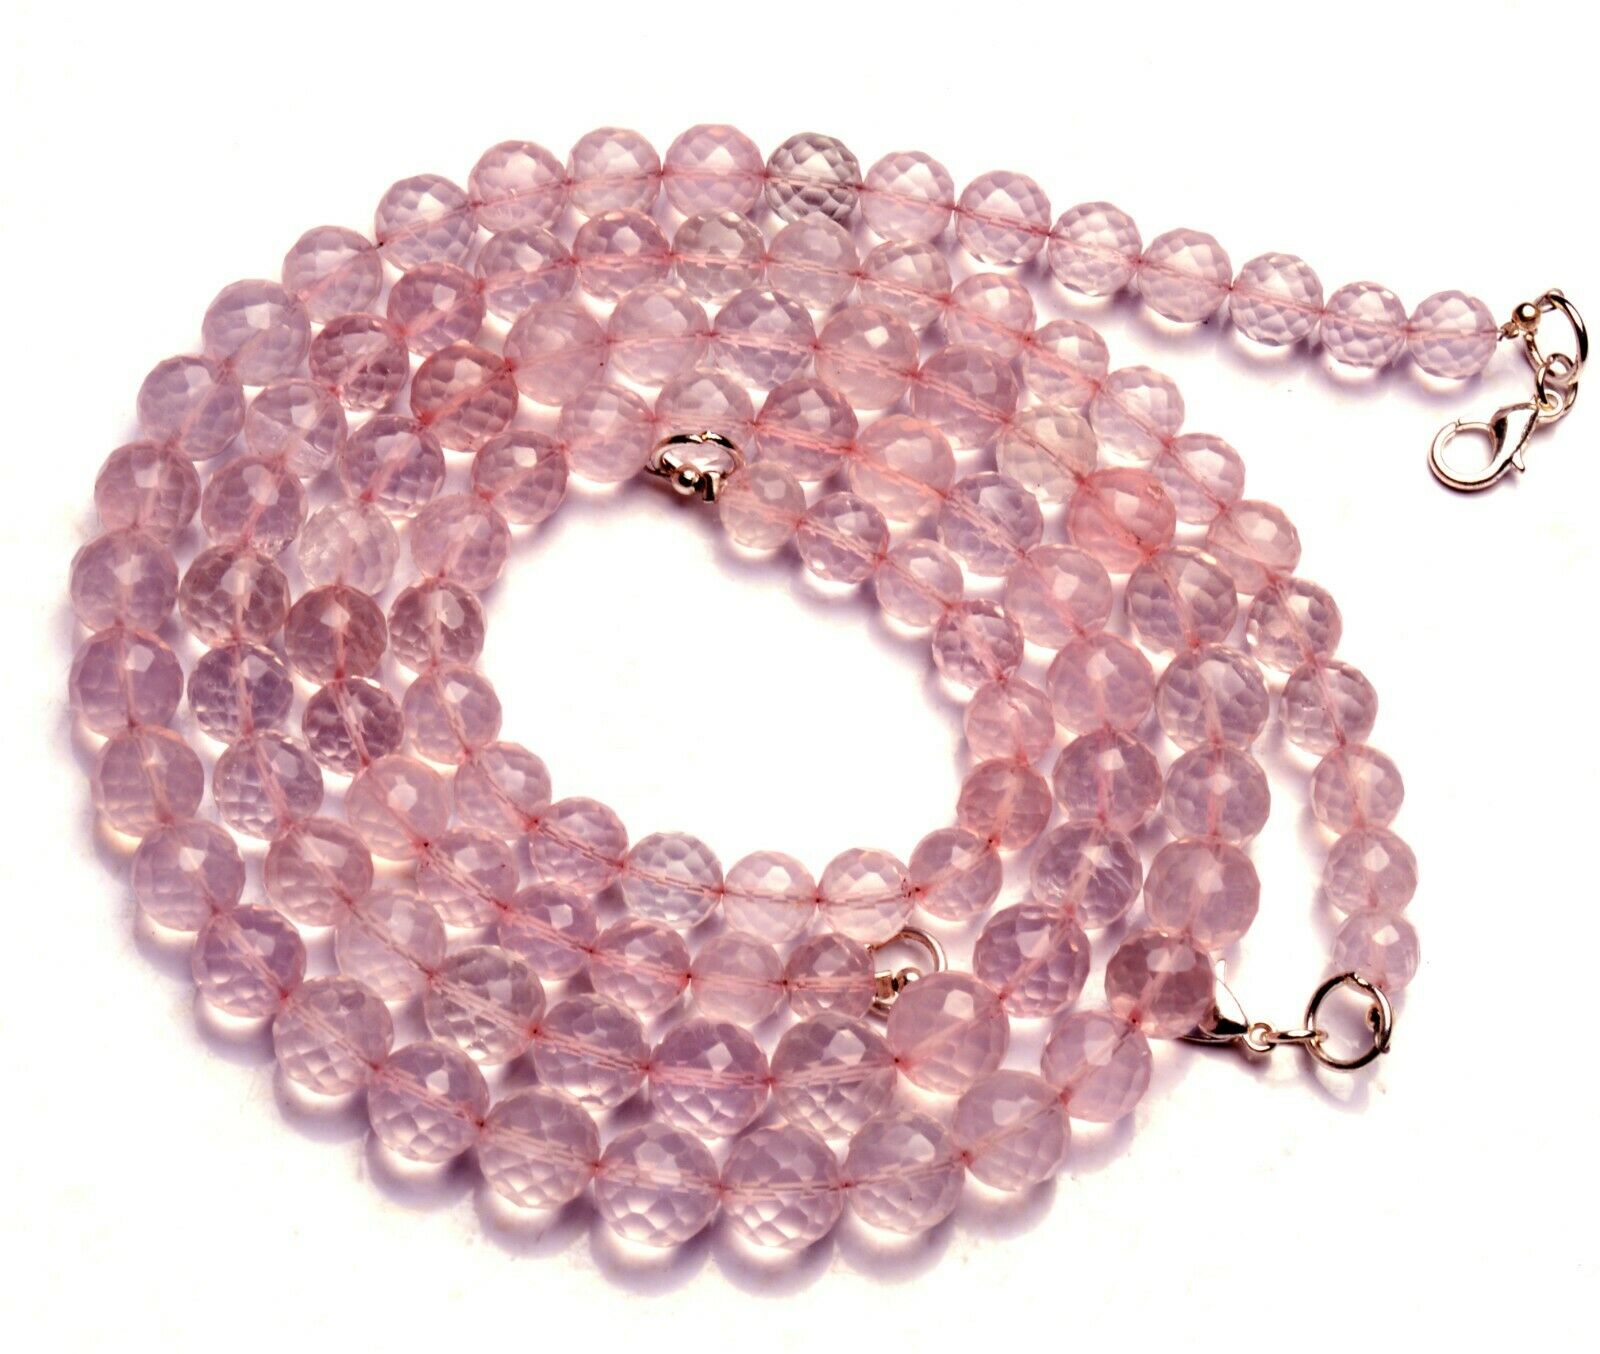 Natural Gem Rose Quartz 7 to 9MM Size Faceted Round Shape Beads Necklace 17